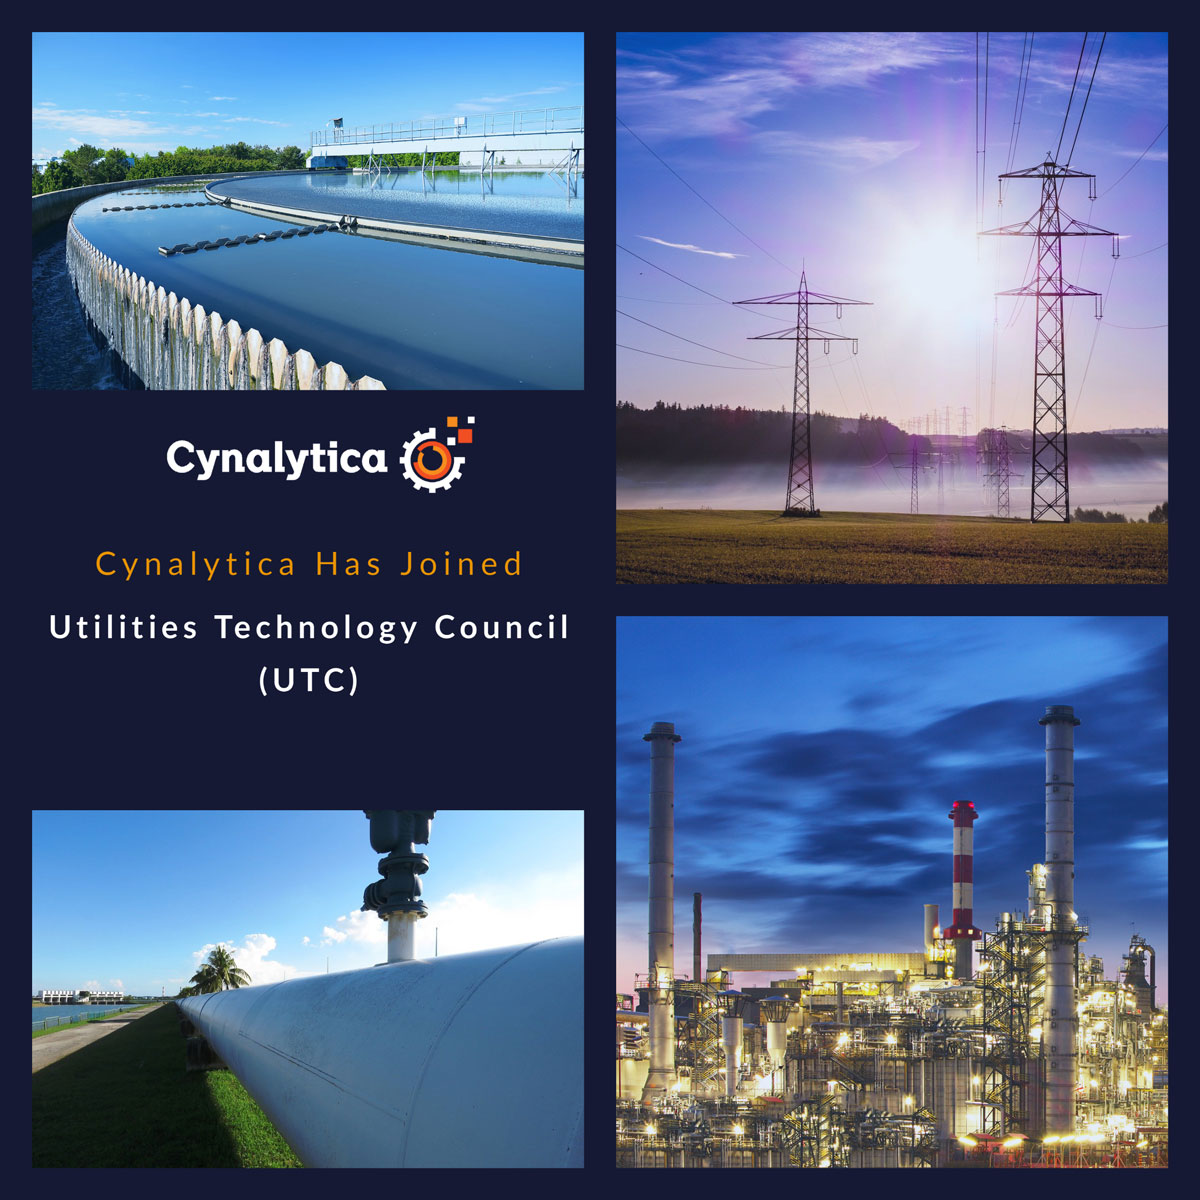 Cynalytica has joined Utilities Technology Council